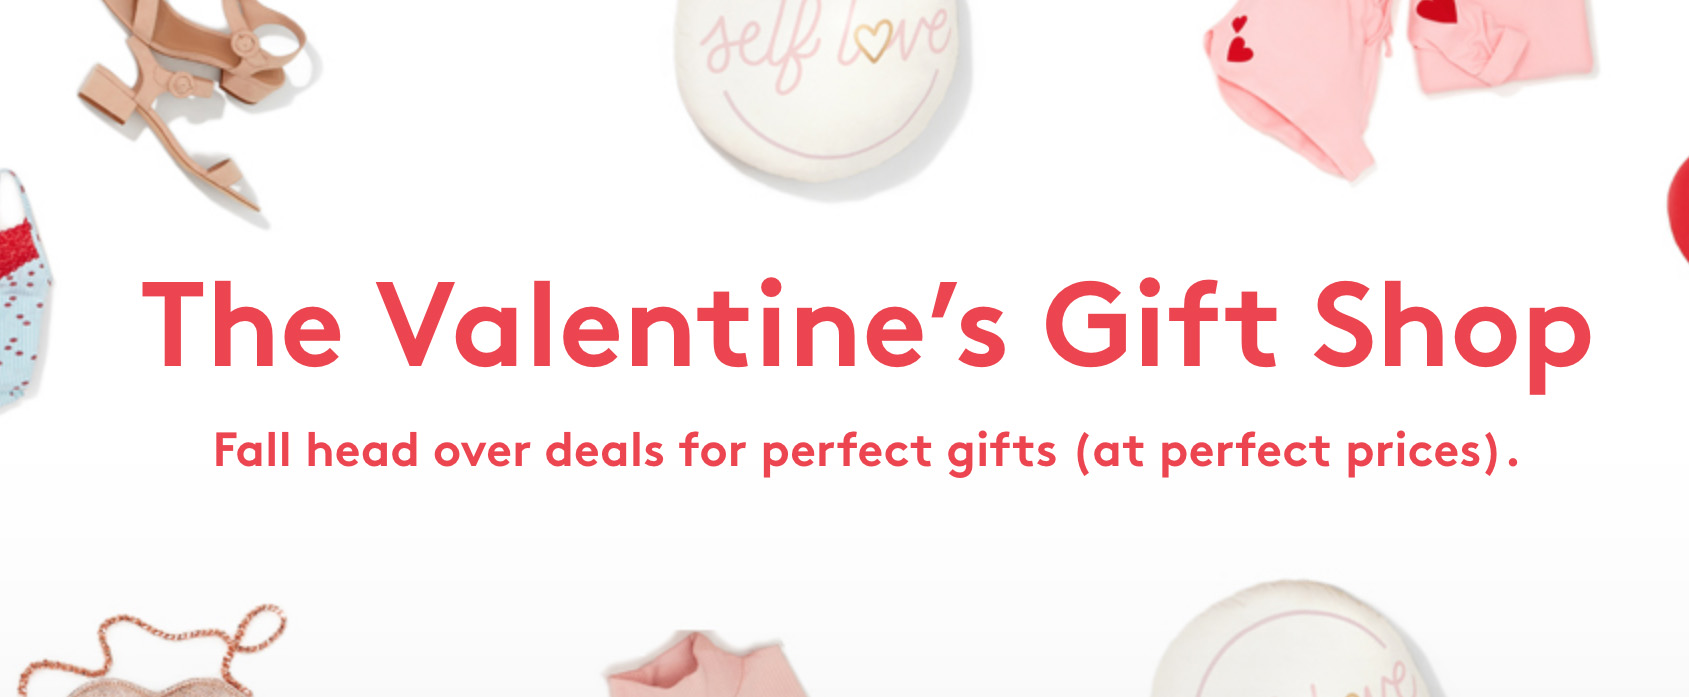 Nordstrom Rack's Valentine's Day Gift Guide is live with an... - 9to5Toys